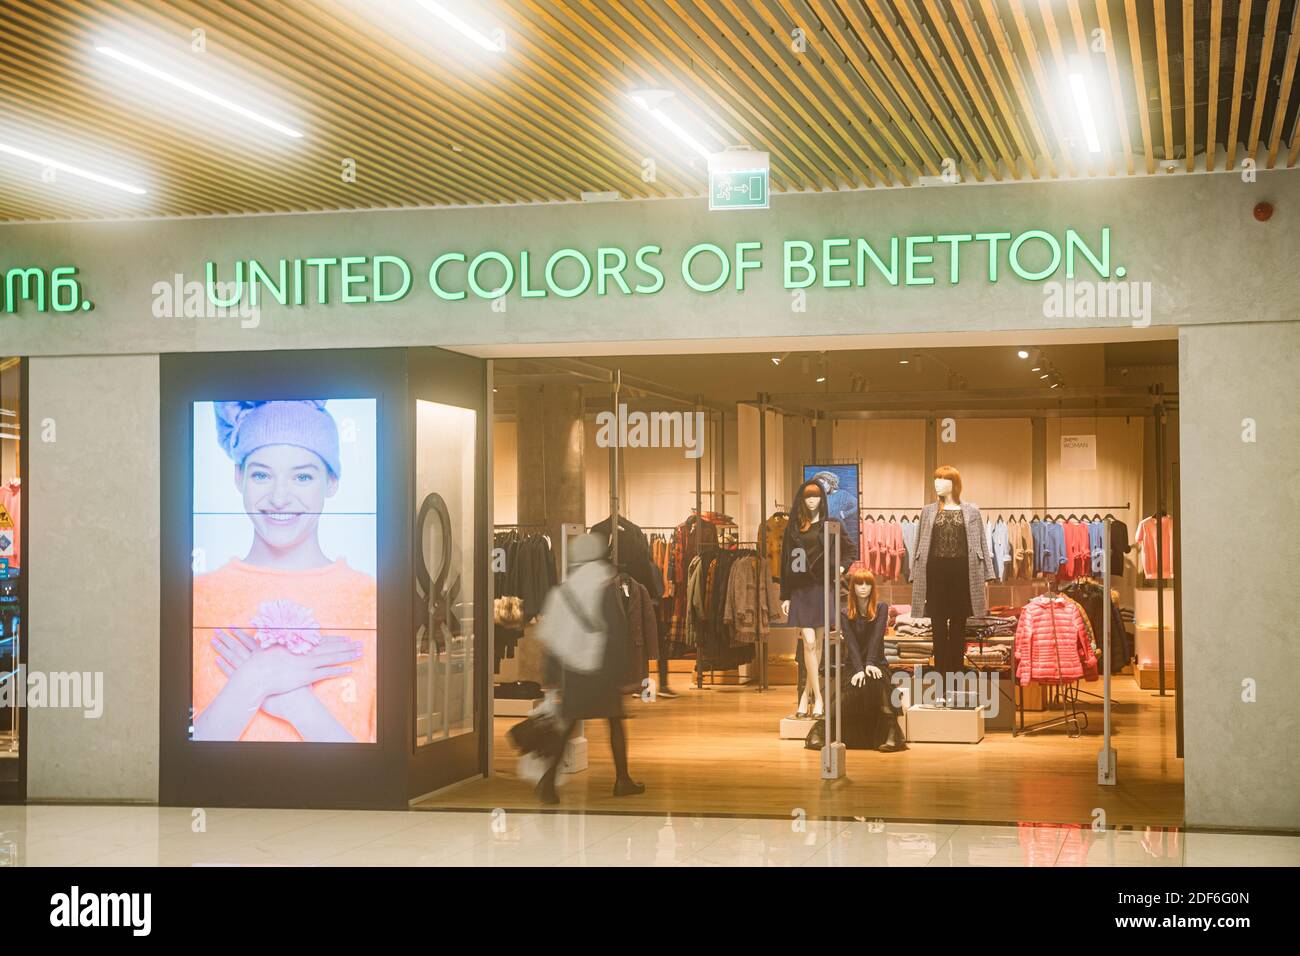 United Colors Of Benetton Shop High Resolution Stock Photography and Images  - Alamy